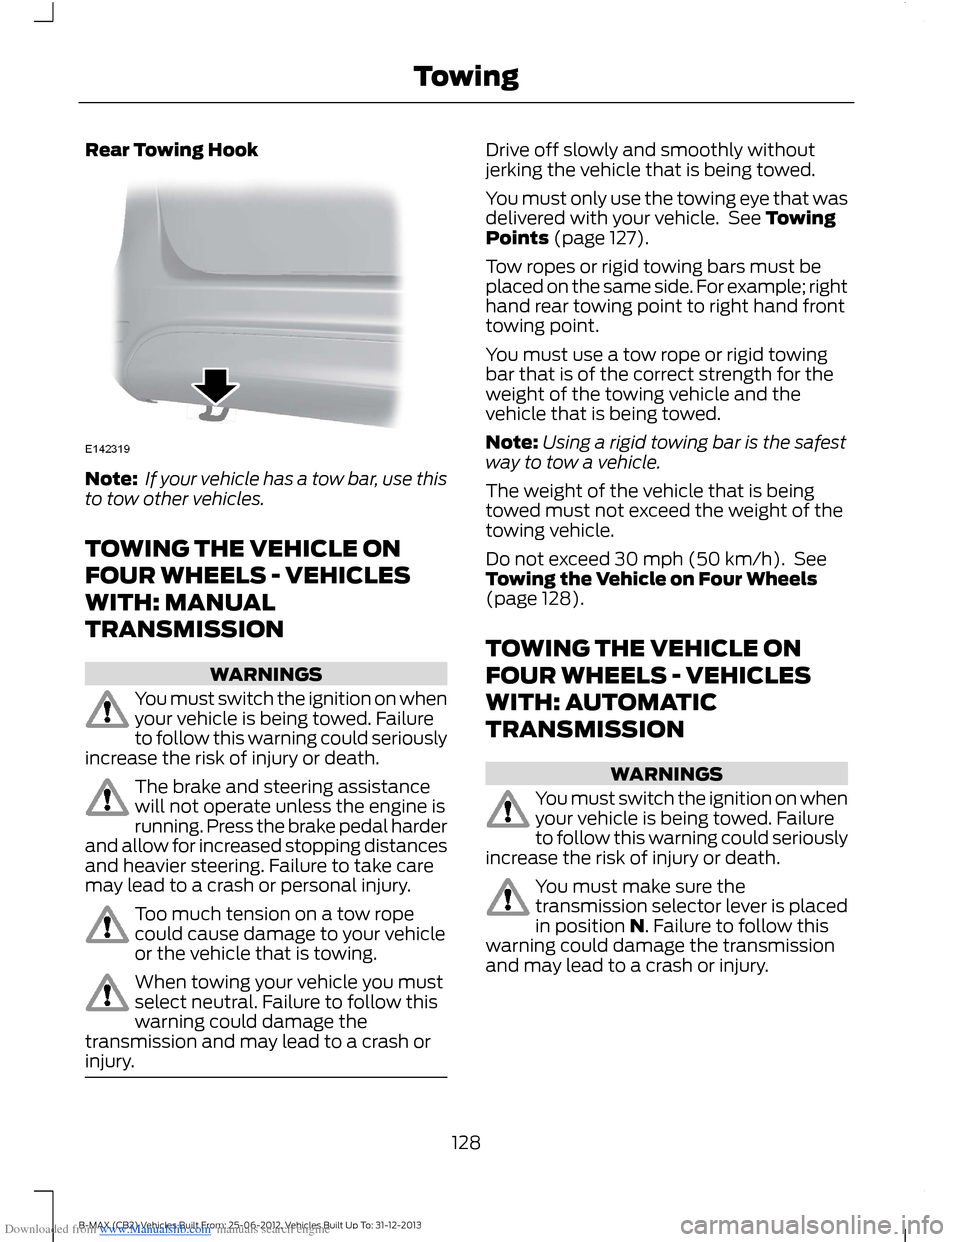 FORD B MAX 2013 1.G Owners Manual Downloaded from www.Manualslib.com manuals search engine Rear Towing Hook
Note: If your vehicle has a tow bar, use thisto tow other vehicles.
TOWING THE VEHICLE ON
FOUR WHEELS - VEHICLES
WITH: MANUAL
